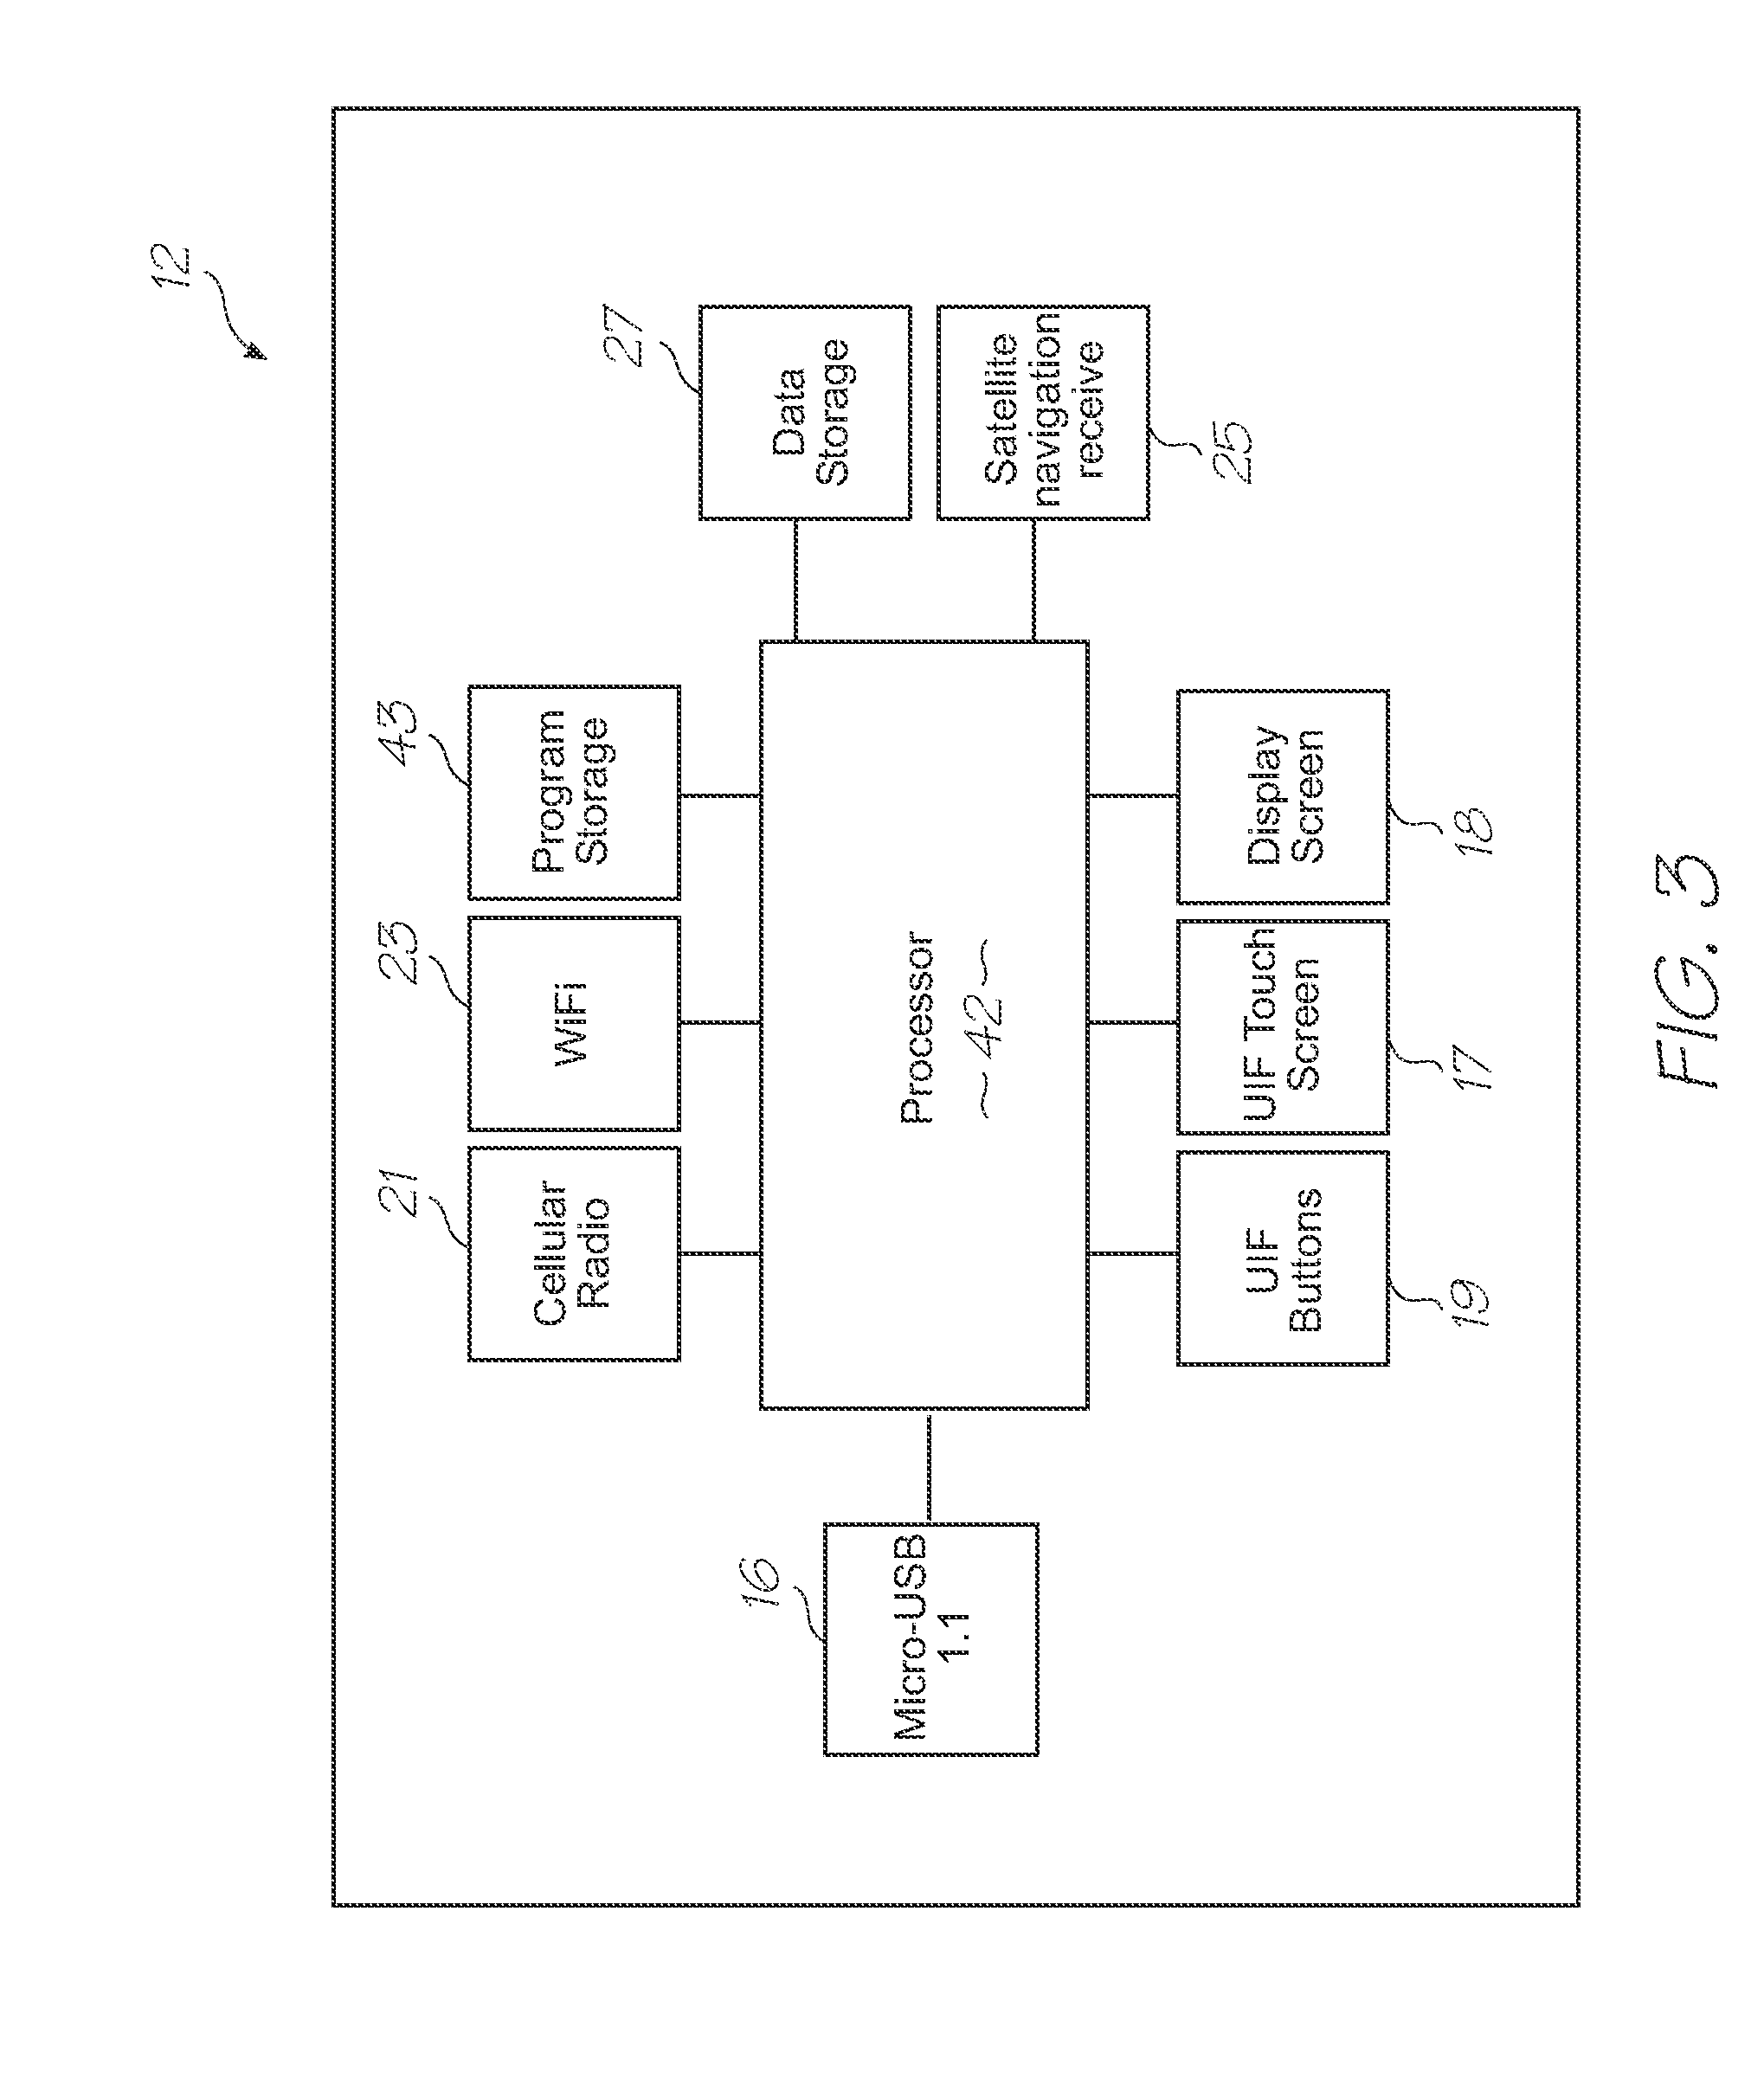 Microfluidic device for electrochemiluminescent detection of target sequences